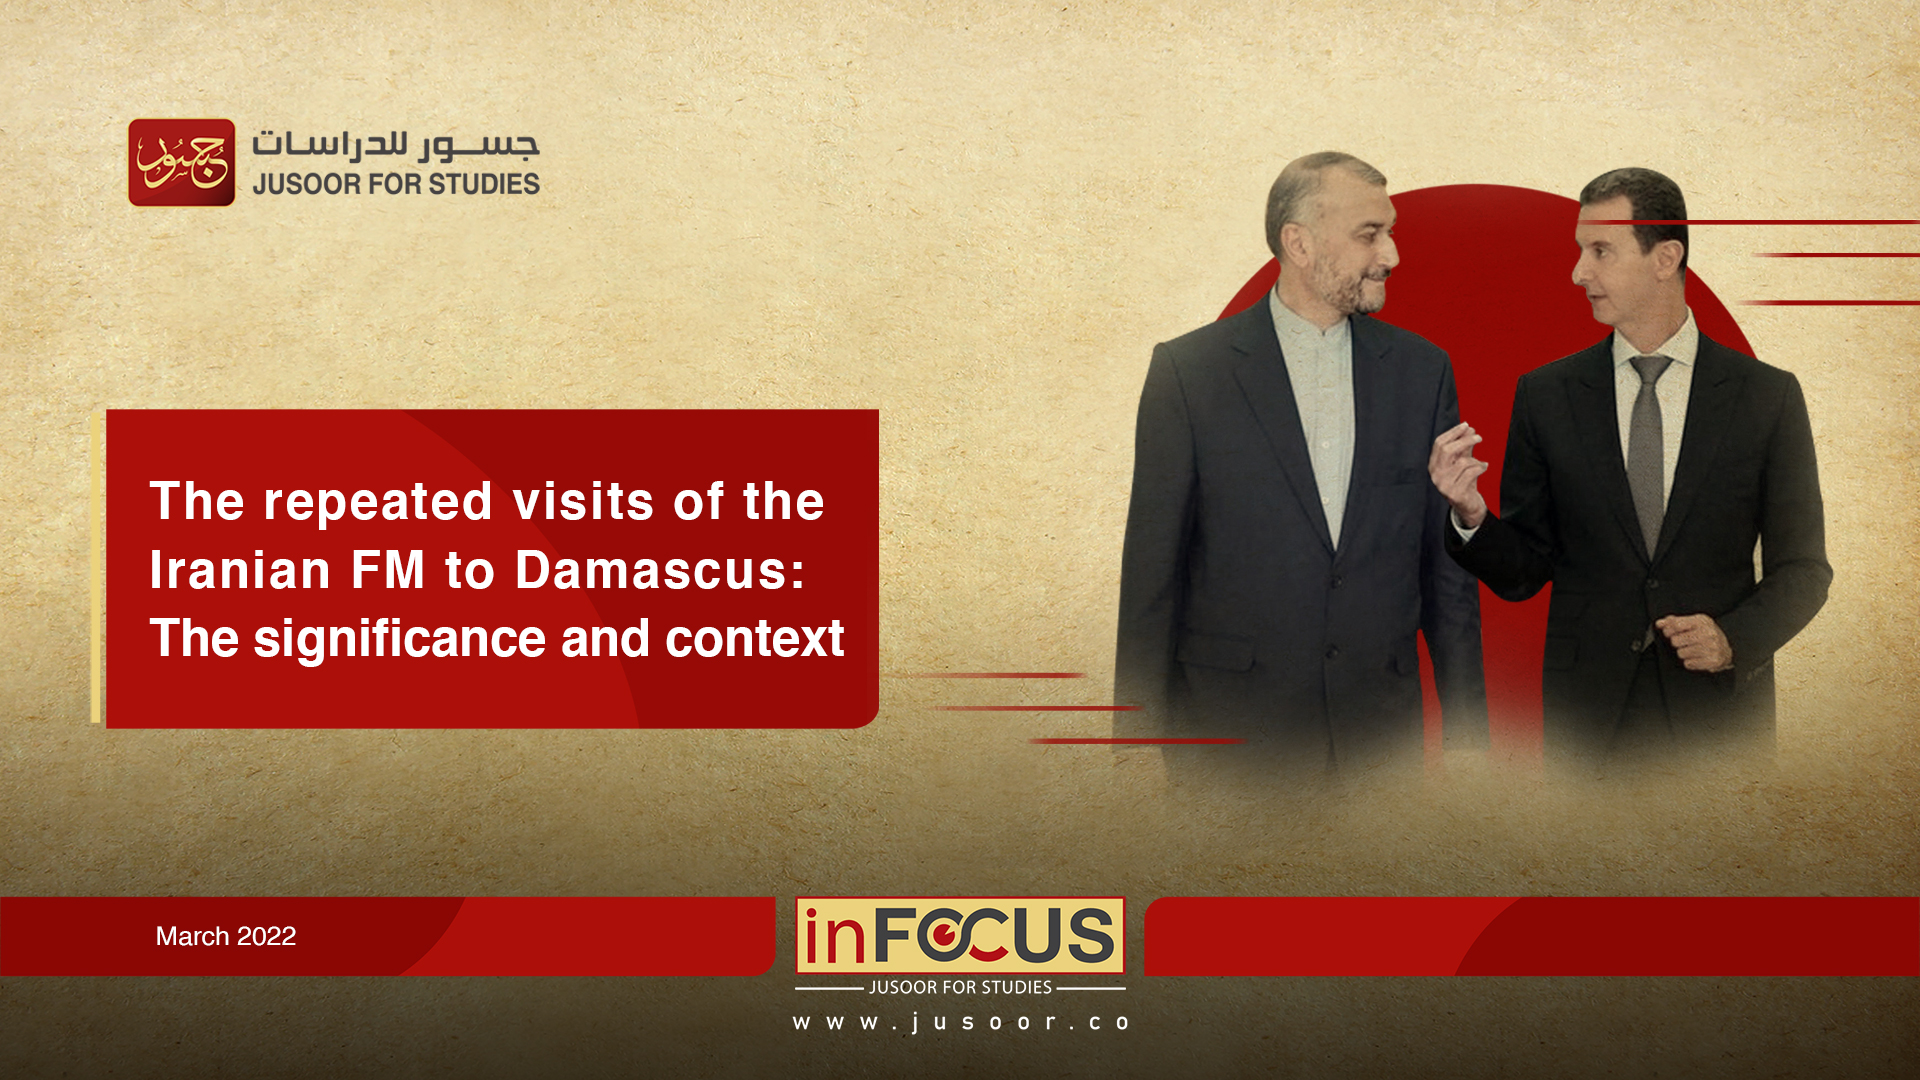 The repeated visits of the Iranian FM to Damascus: The significance and context